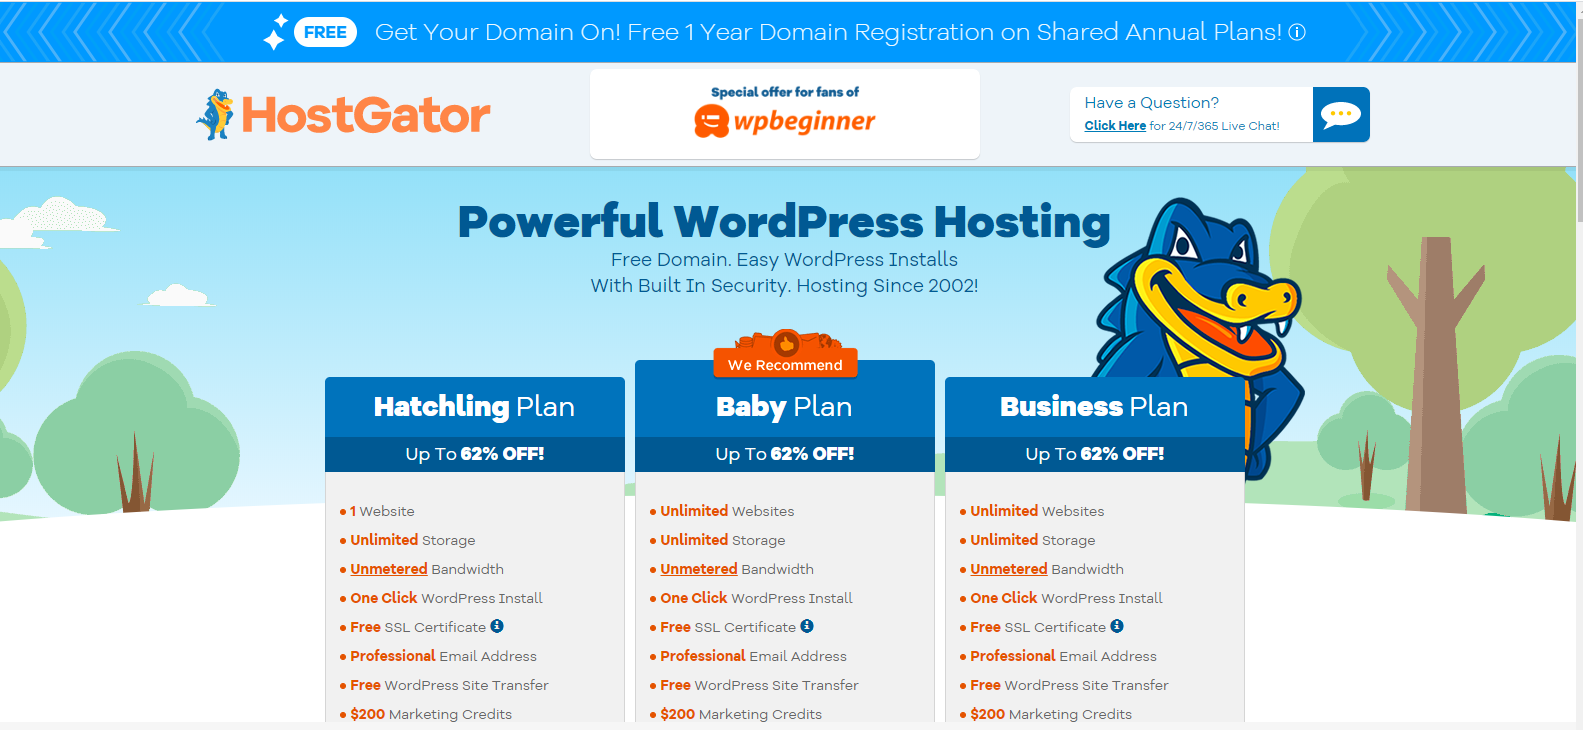 The Best 10 Web Hosting Providers For Your Small Business - Image 8